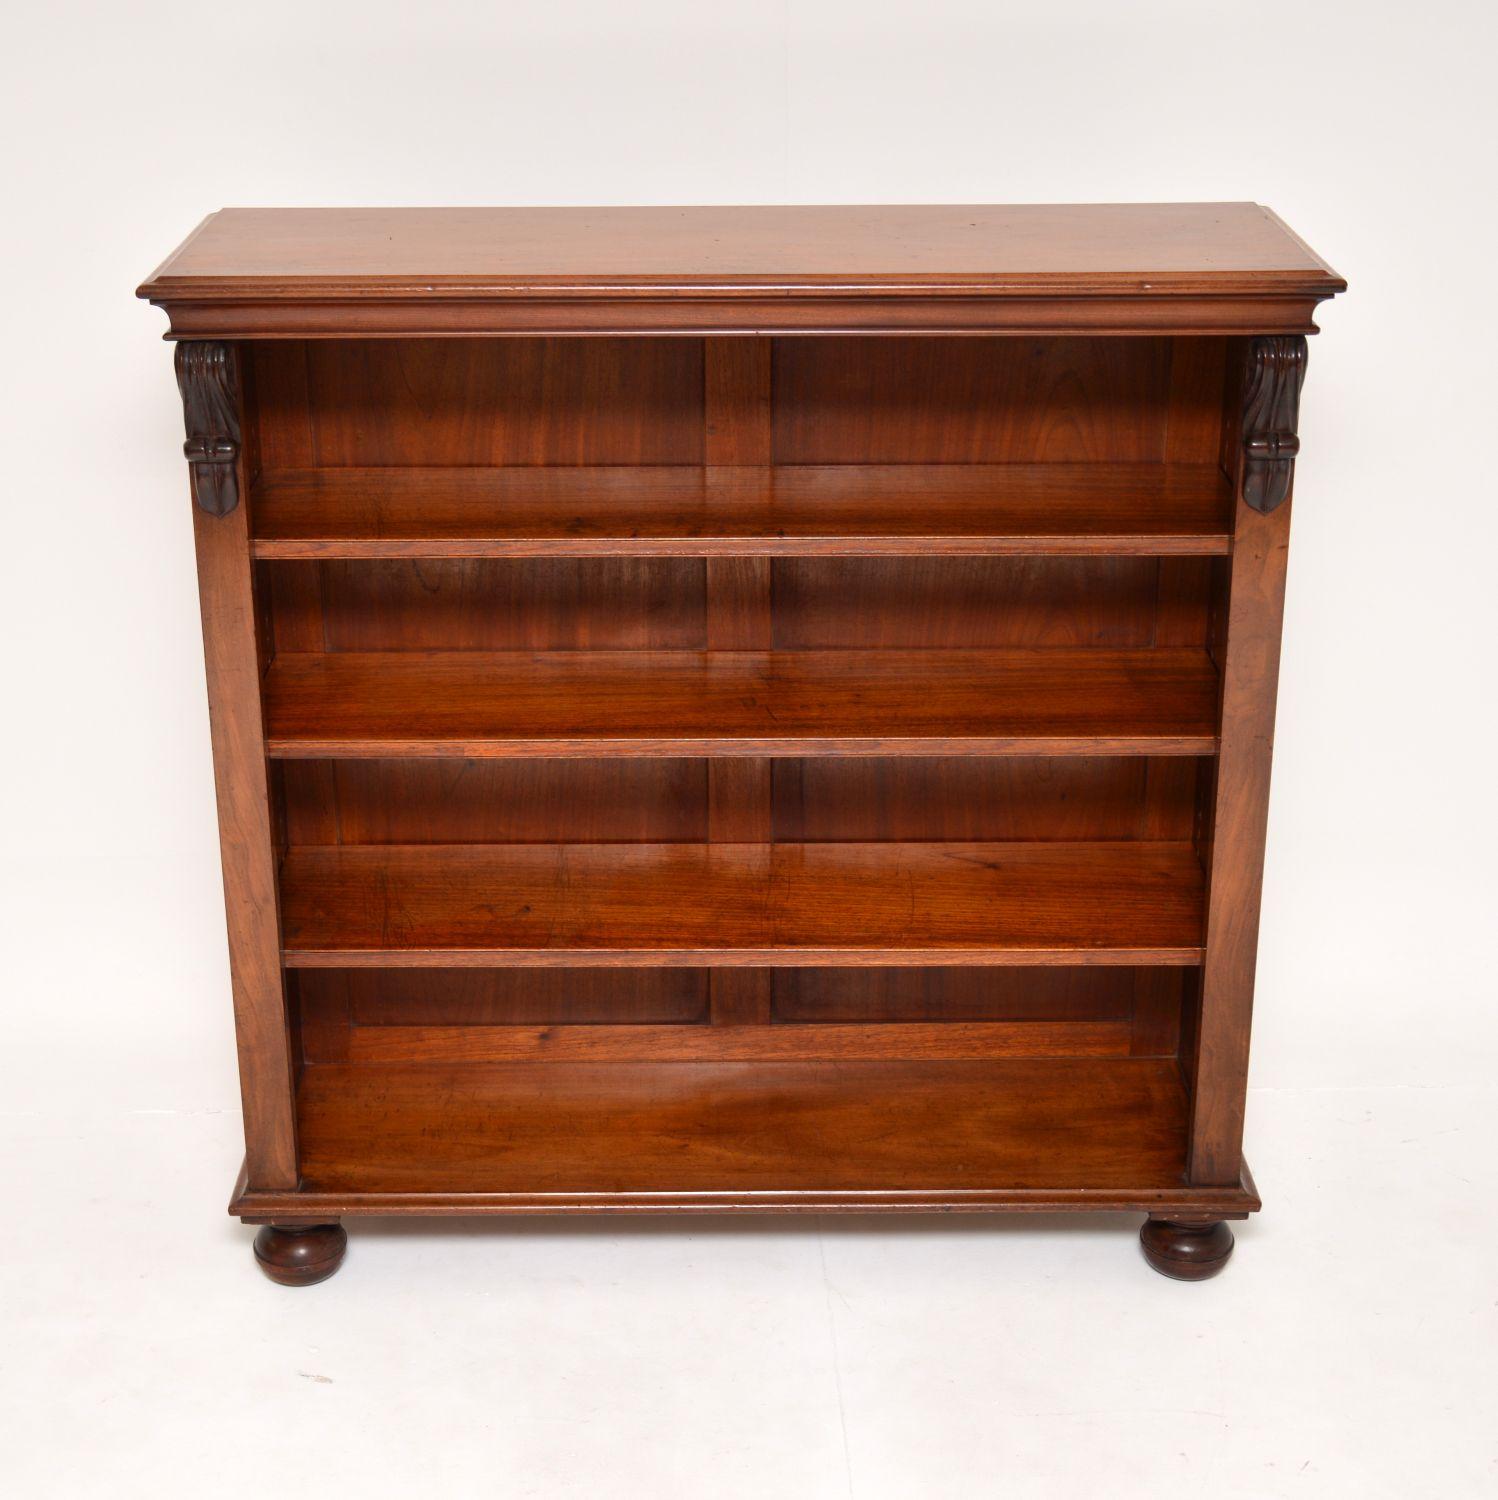 An amazing antique Victorian open bookcase in solid walnut. This was made in England, it dates from around the 1860-80’s.

The quality is outstanding, it’s a beautifully designed and very practical piece. The solid walnut carcass has lovely